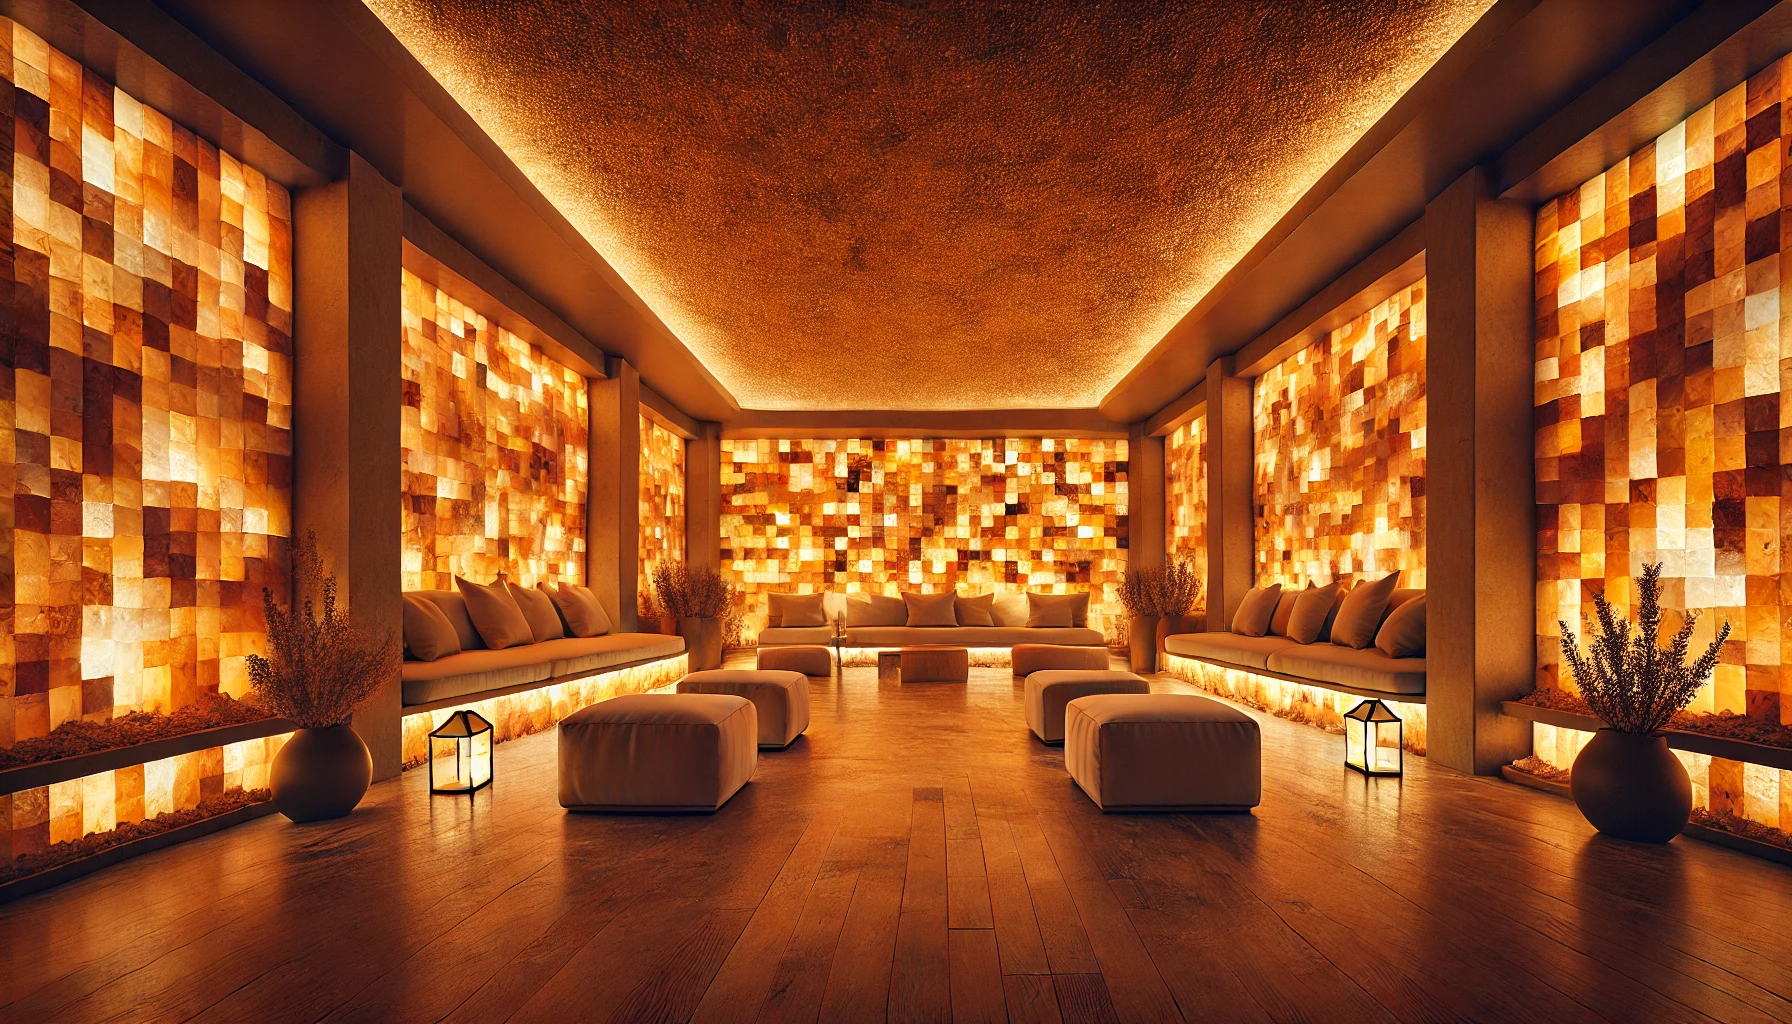 Himalayan Salt Room Spa | Relaxation & Wellness in a Serene Environment